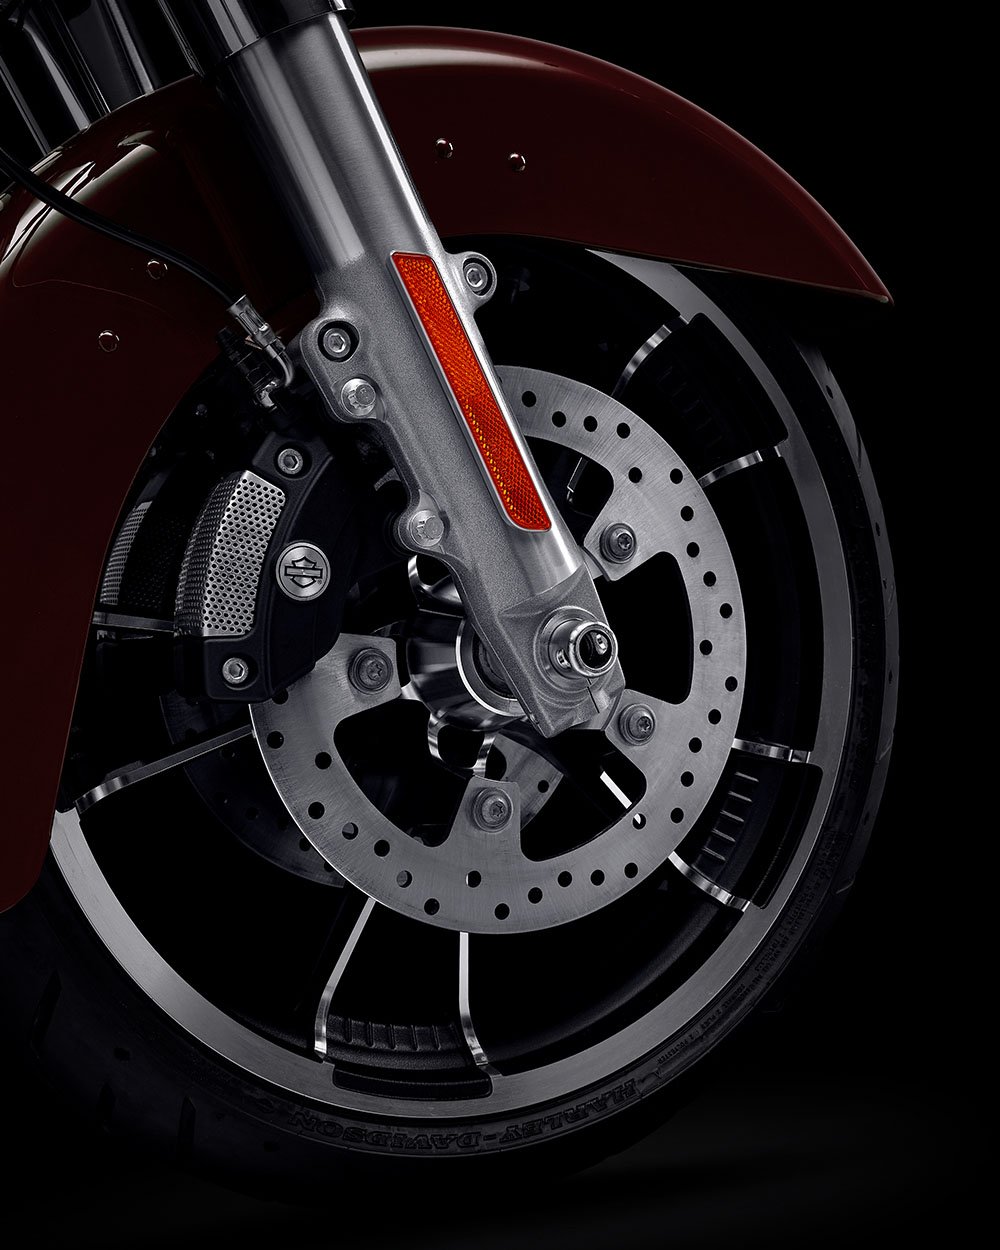 Reflex Linked Brembo Brakes with Optional ABS on a 2022 Street Glide